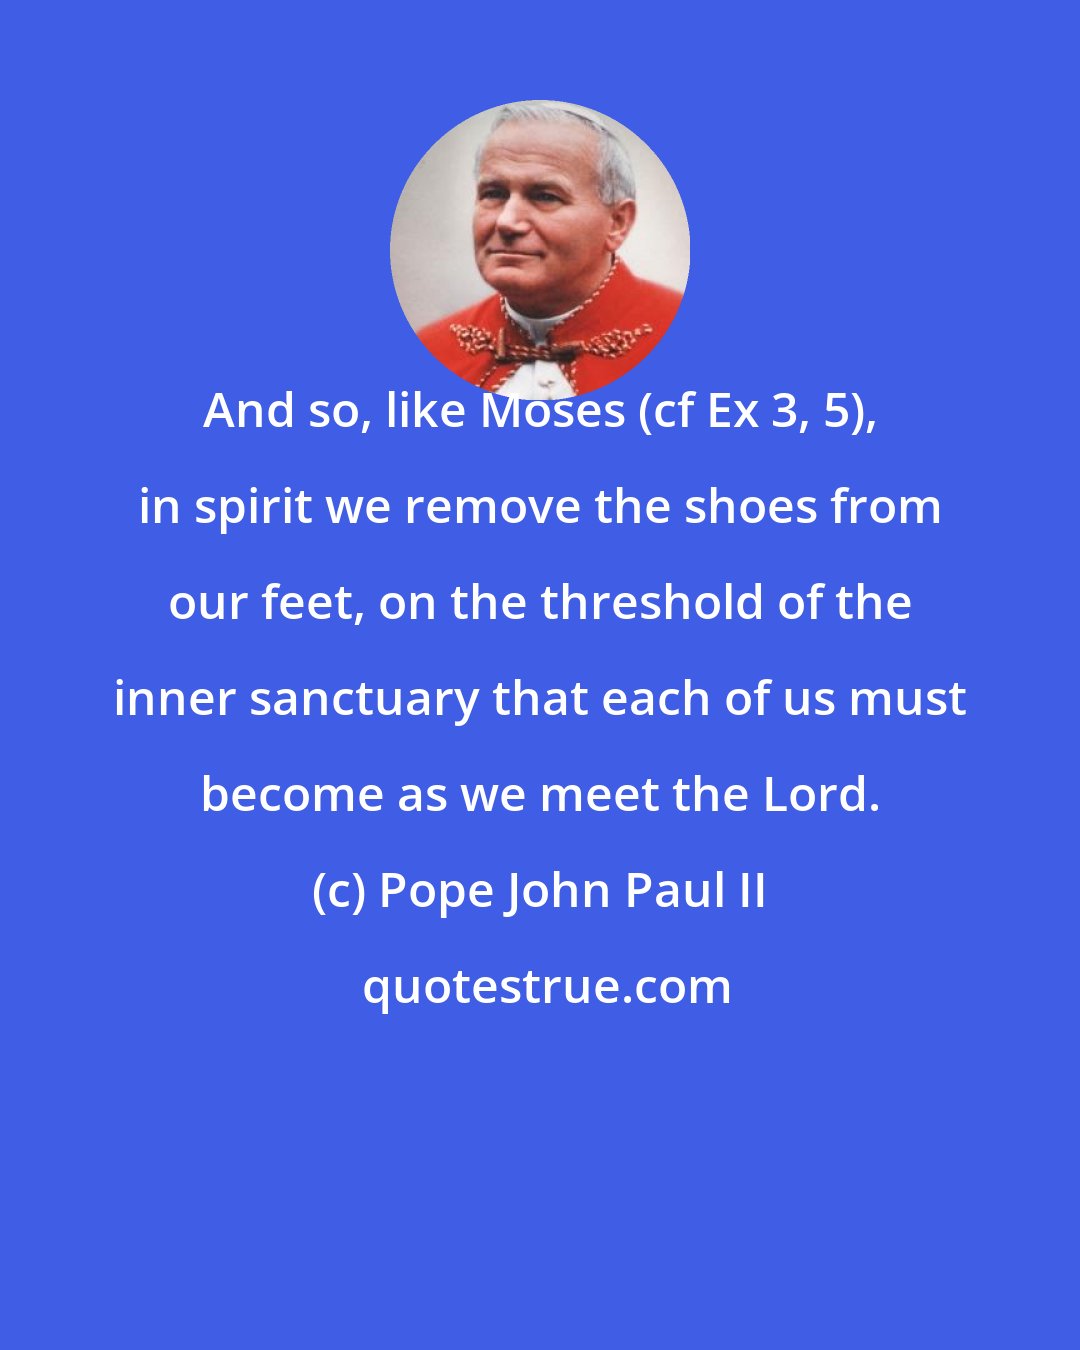 Pope John Paul II: And so, like Moses (cf Ex 3, 5), in spirit we remove the shoes from our feet, on the threshold of the inner sanctuary that each of us must become as we meet the Lord.